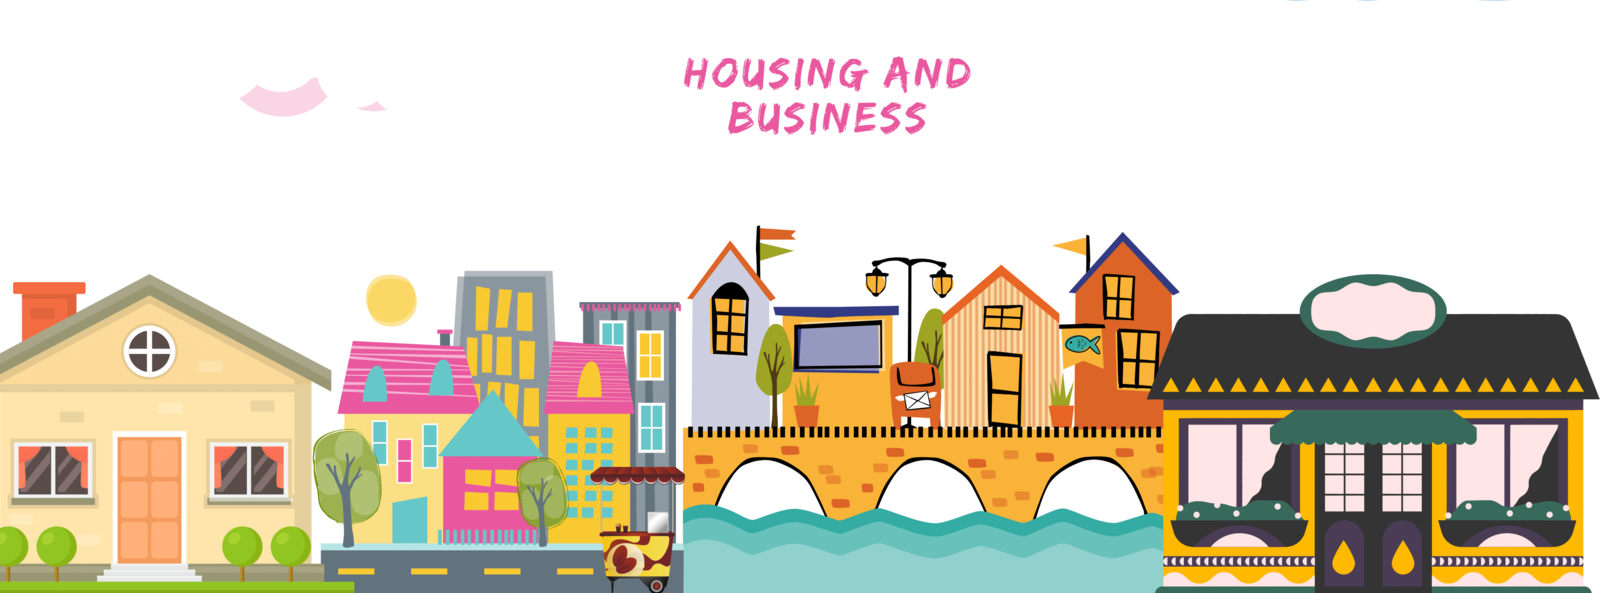 Housing and business graphic with colorful buildings 